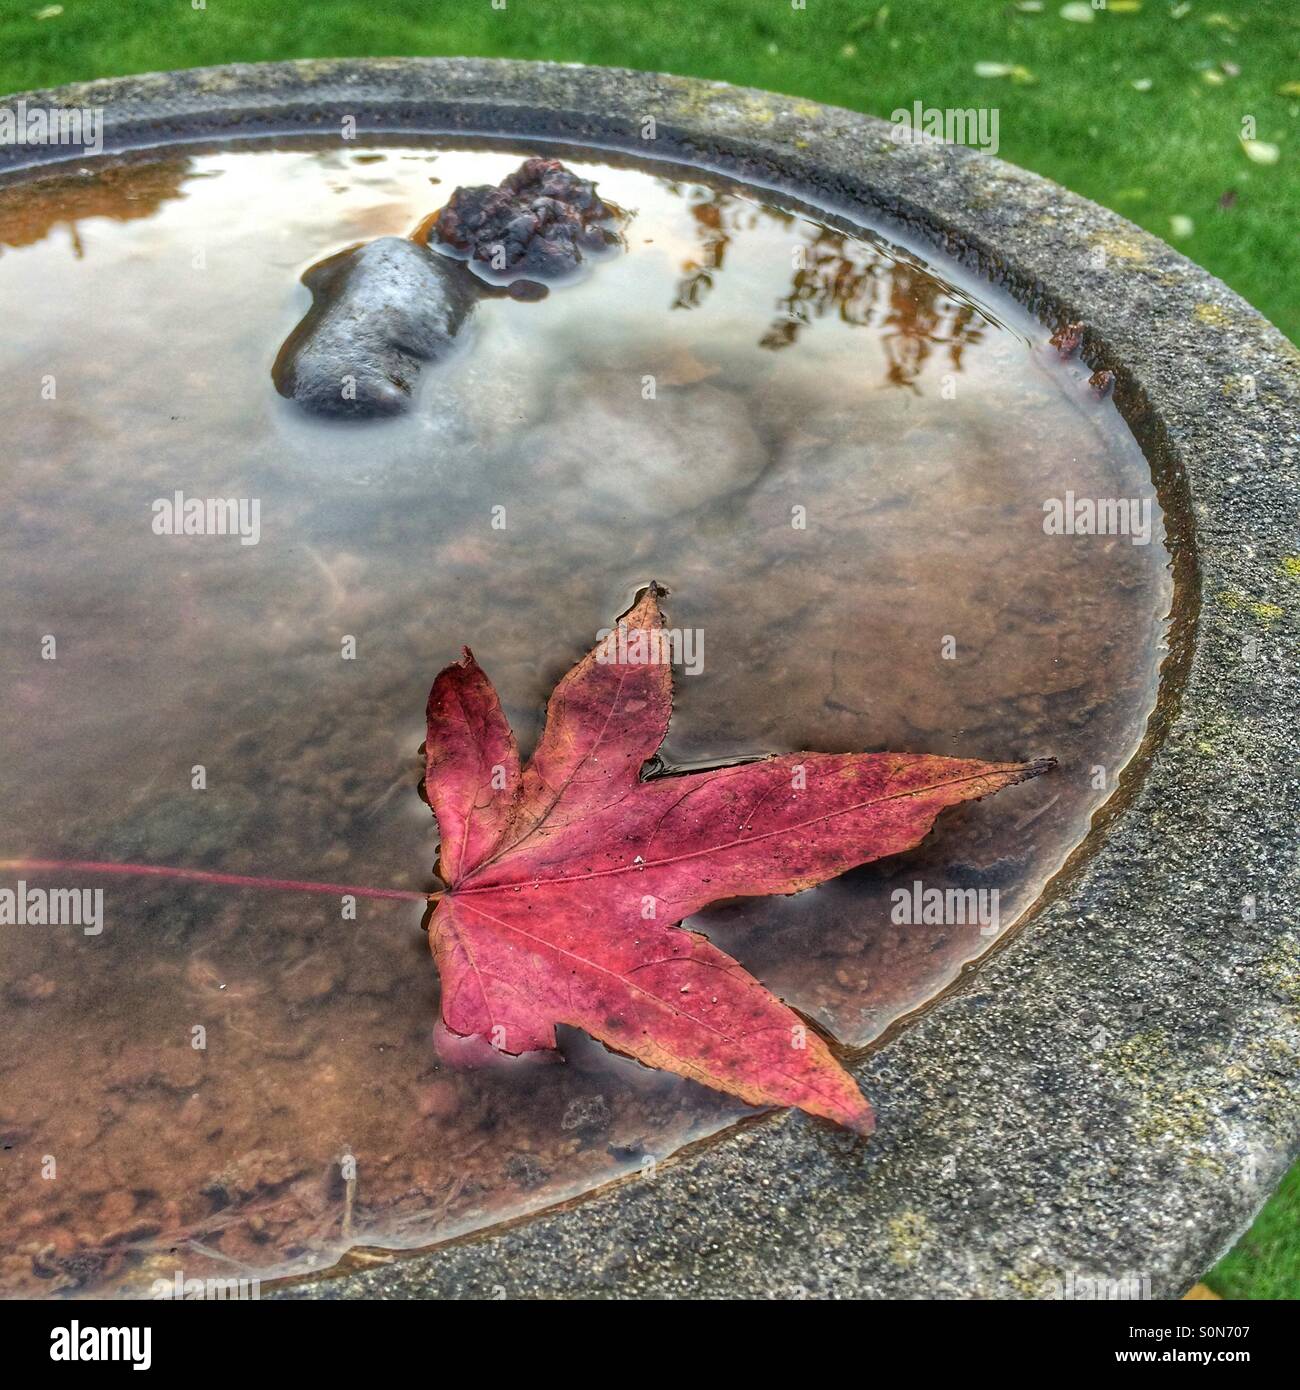 Red autumn leaf in water filled bird bath showing reflections on waters surface Stock Photo